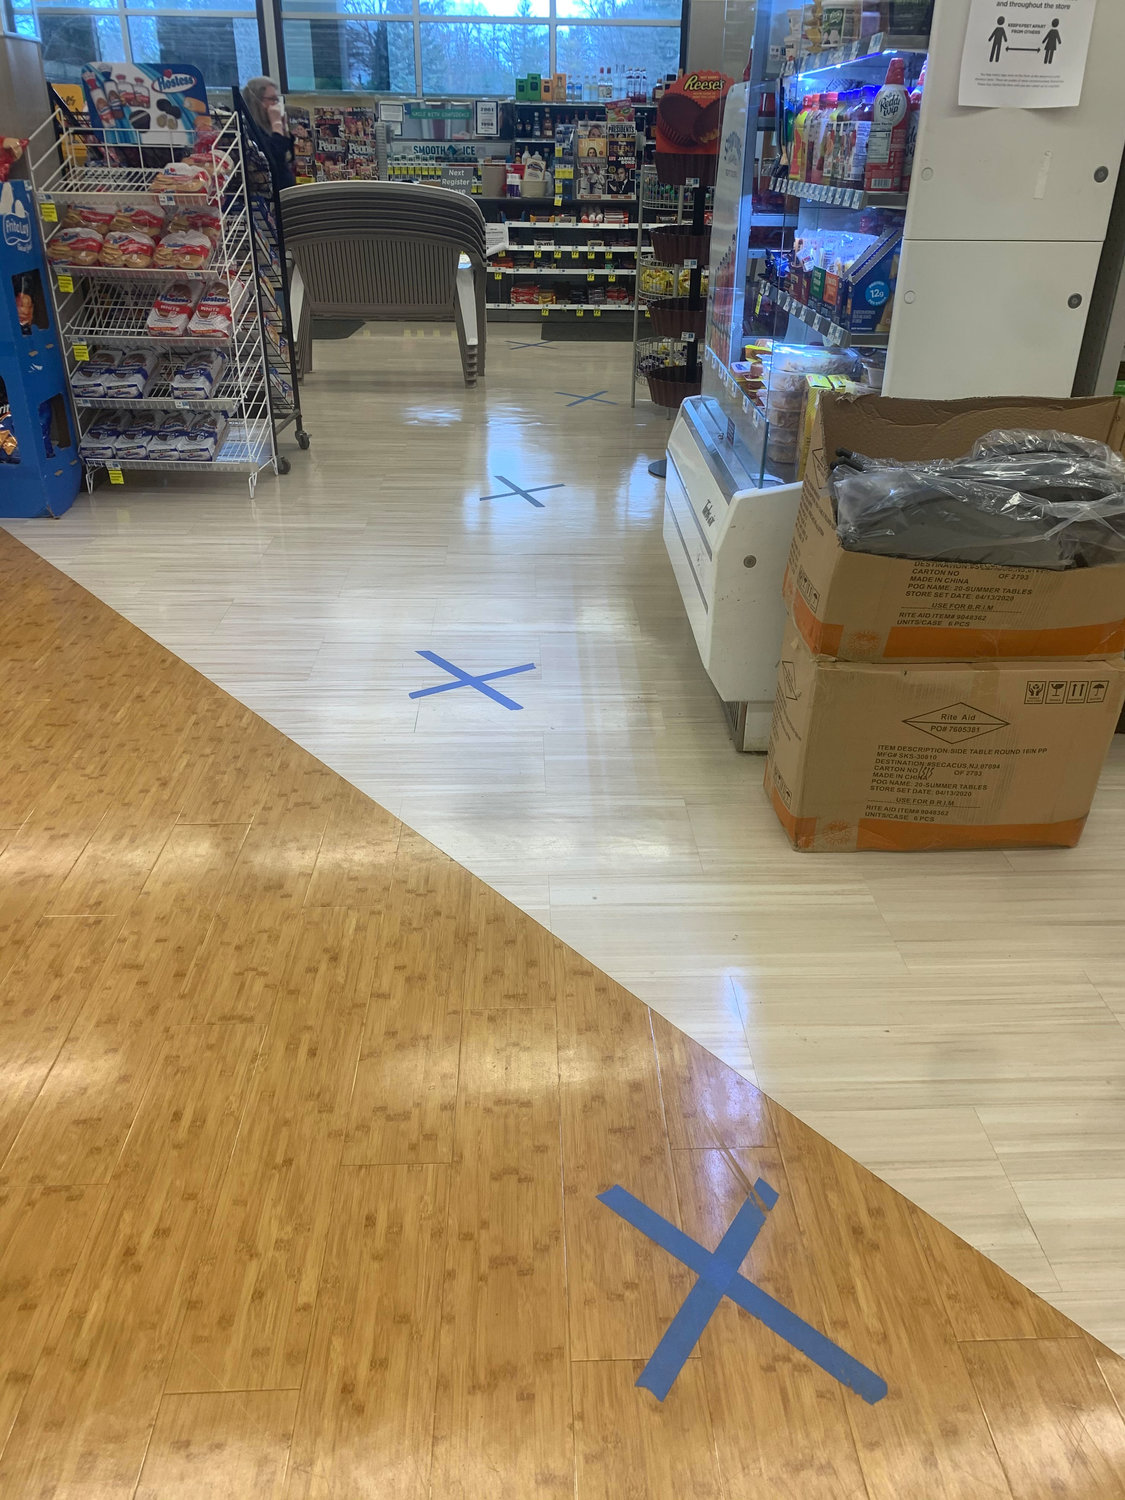 X's taped to the floor instruct customers to keep their distance while waiting in line at Rite Aid.